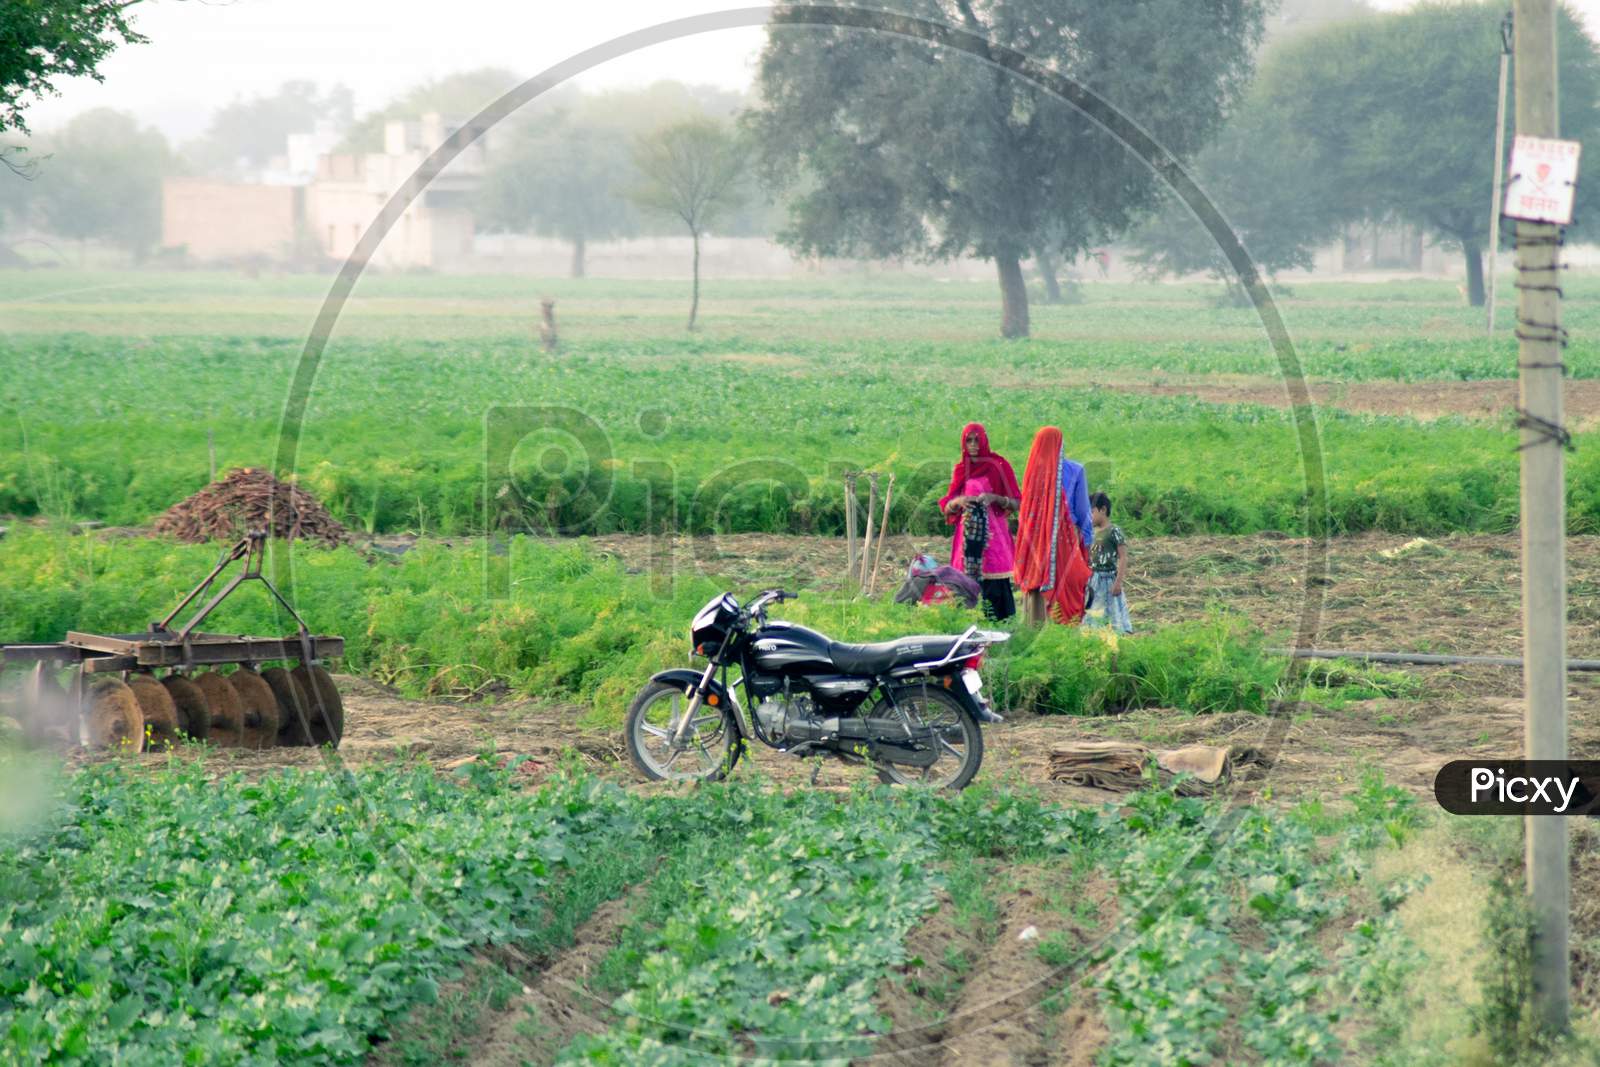 Lady In A Bright Red Saree Tying A Cloth And Getting Ready For Hard Manual Work In The Feild With Rows Of Crops And A Motor Bike Standing And Trees Getting Lost In The Fog In The Distance